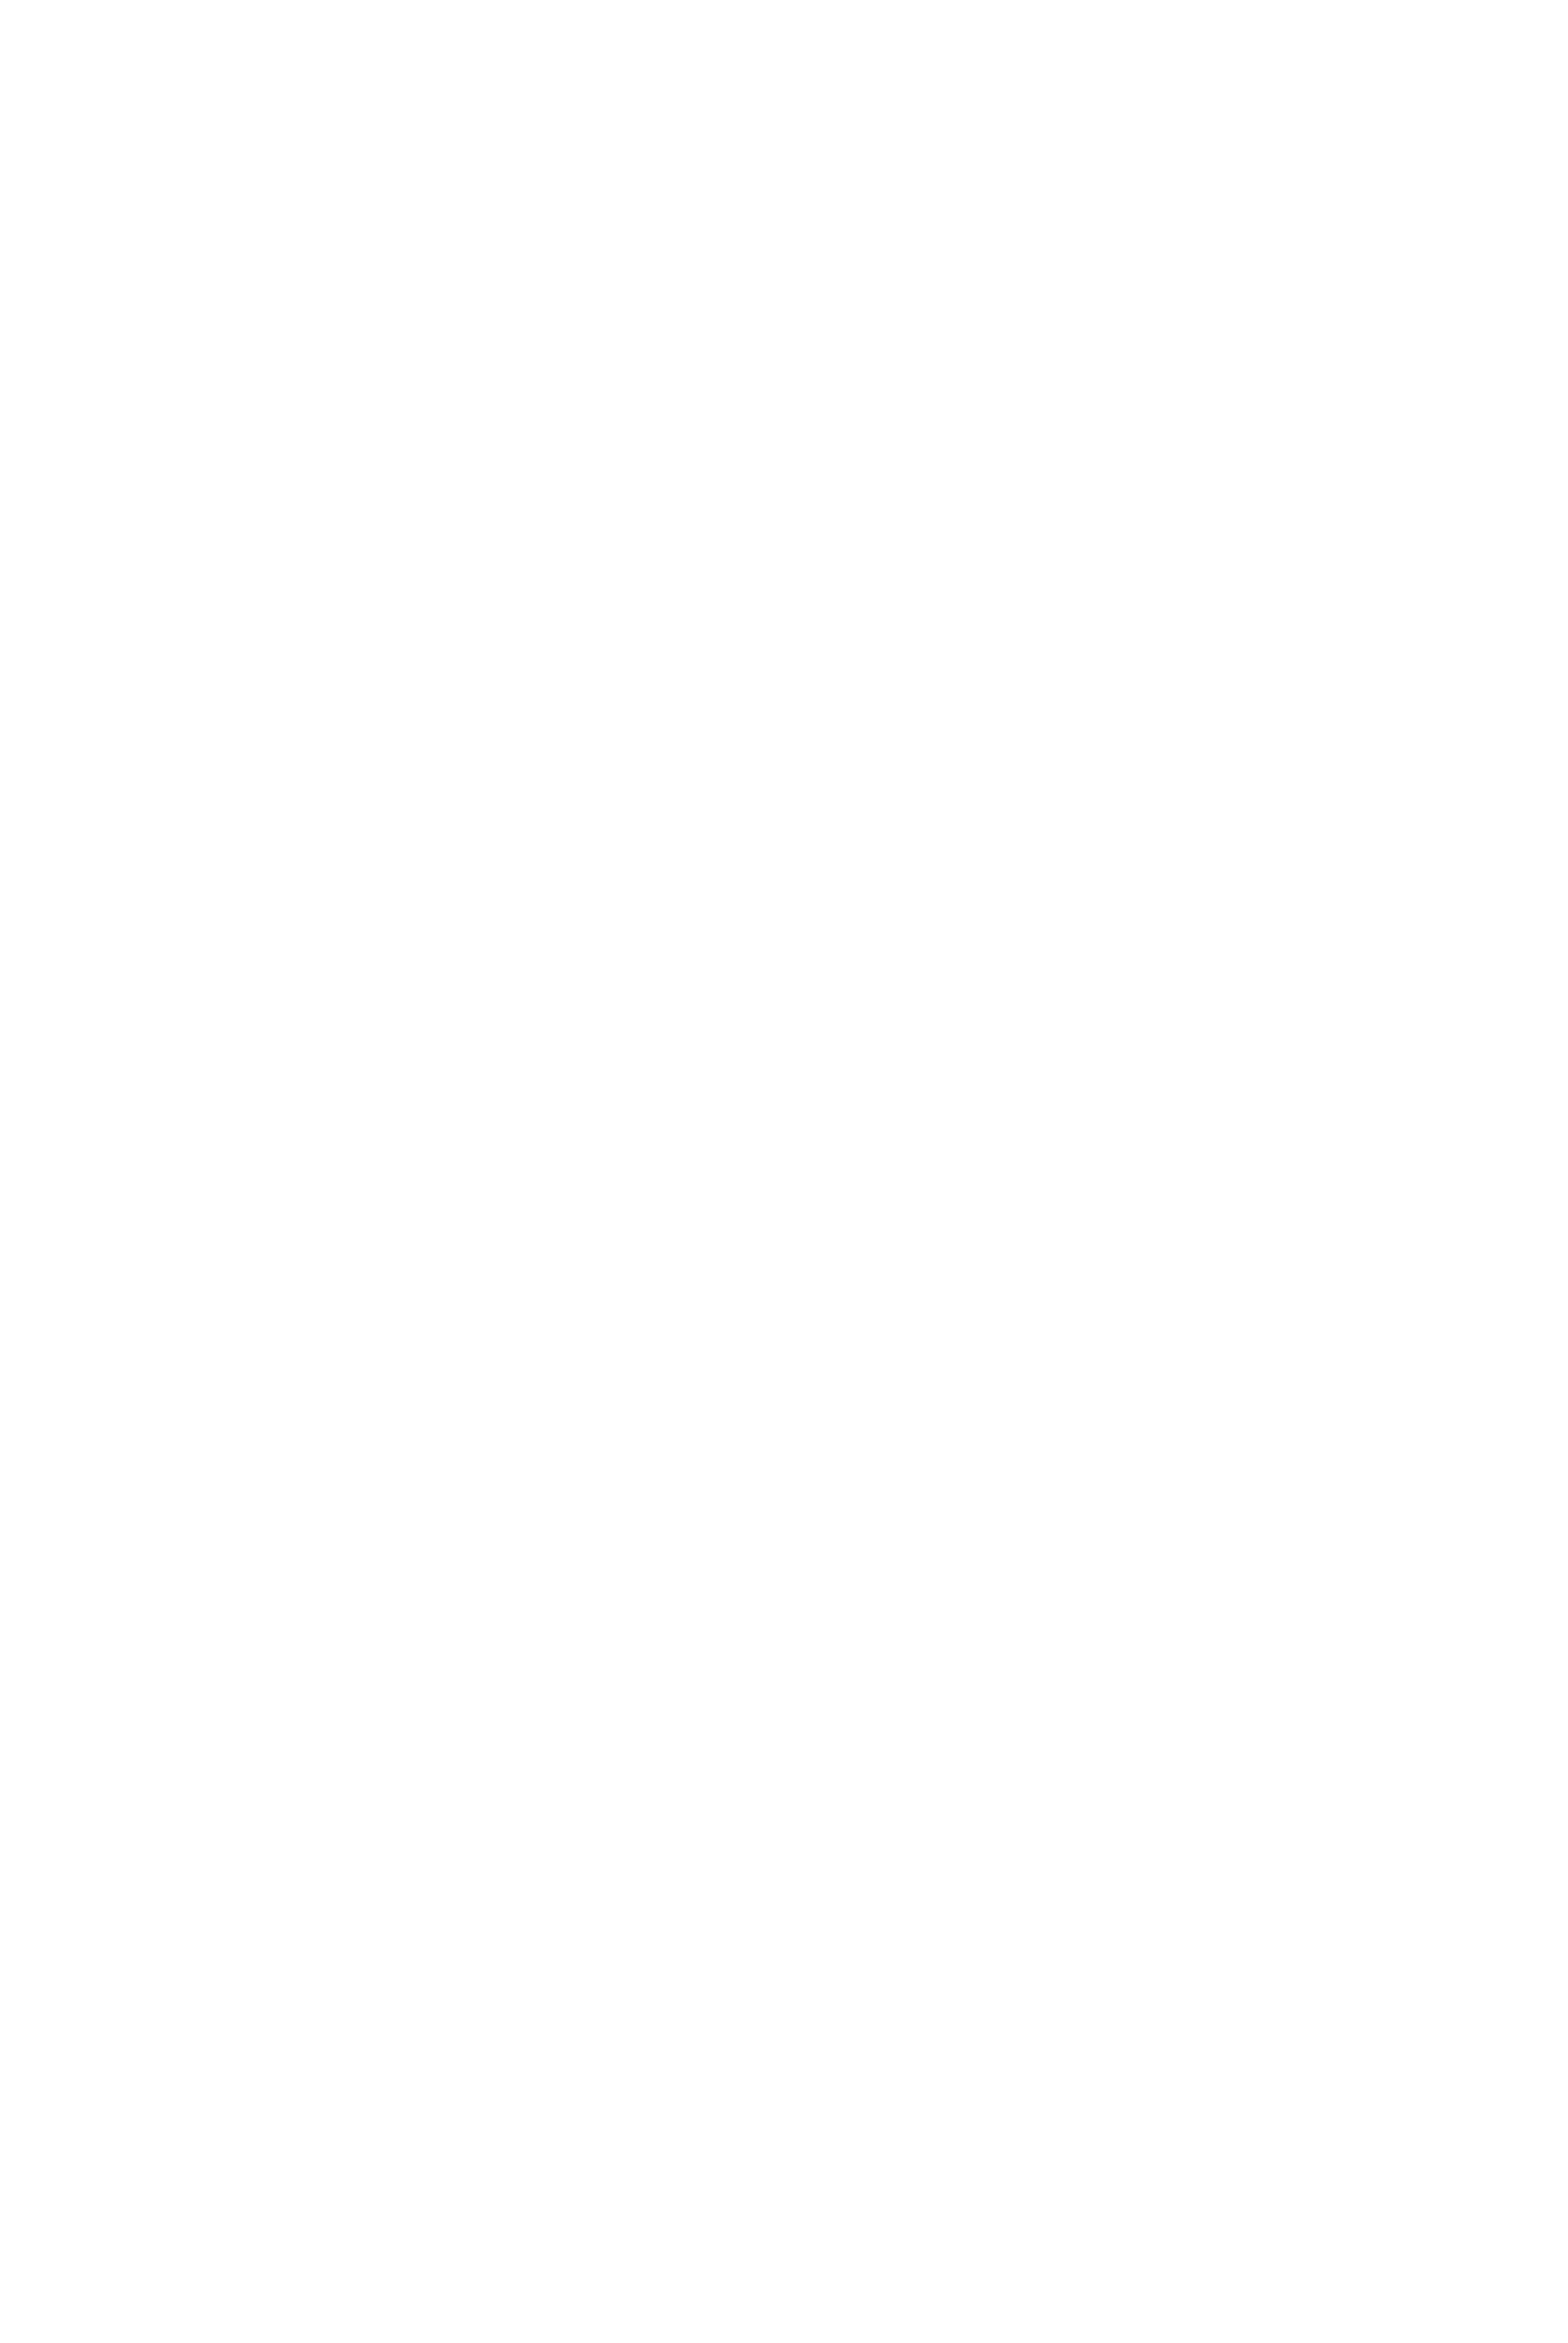 The Magnet programme. Alliances for educational success accompanies schools in developing a transformative project in partnership with an institution of excellence. This collaboration must allow the school to develop an innovative educational project, with magnetism, both for families as well as for the educational community.